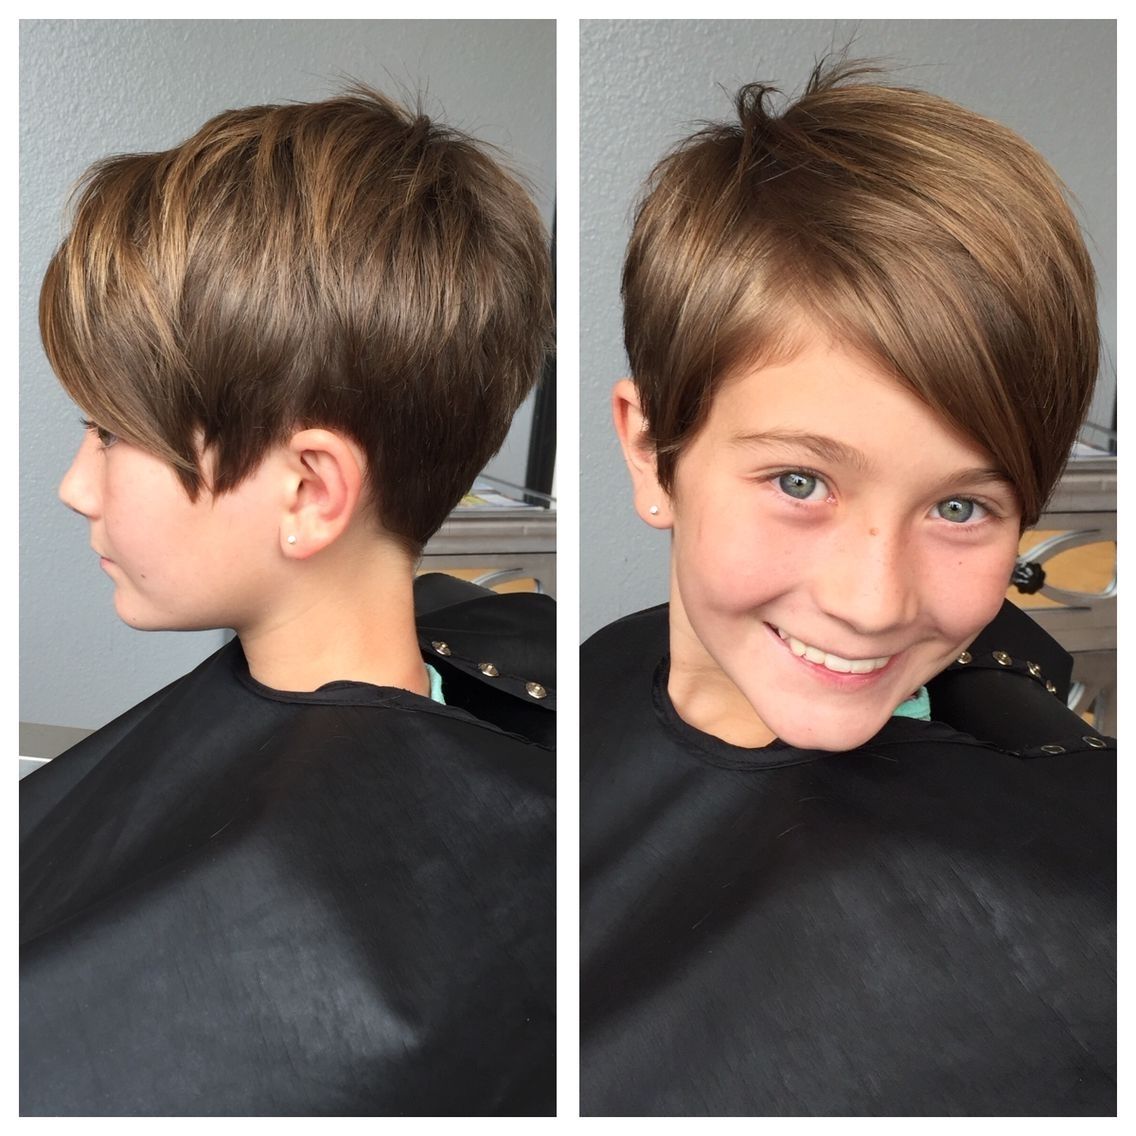 Kids Pixie Haircut | Hair | Pinterest | Pixie Haircut, Pixies And Intended For Current Girls Pixie Hairstyles (View 1 of 15)